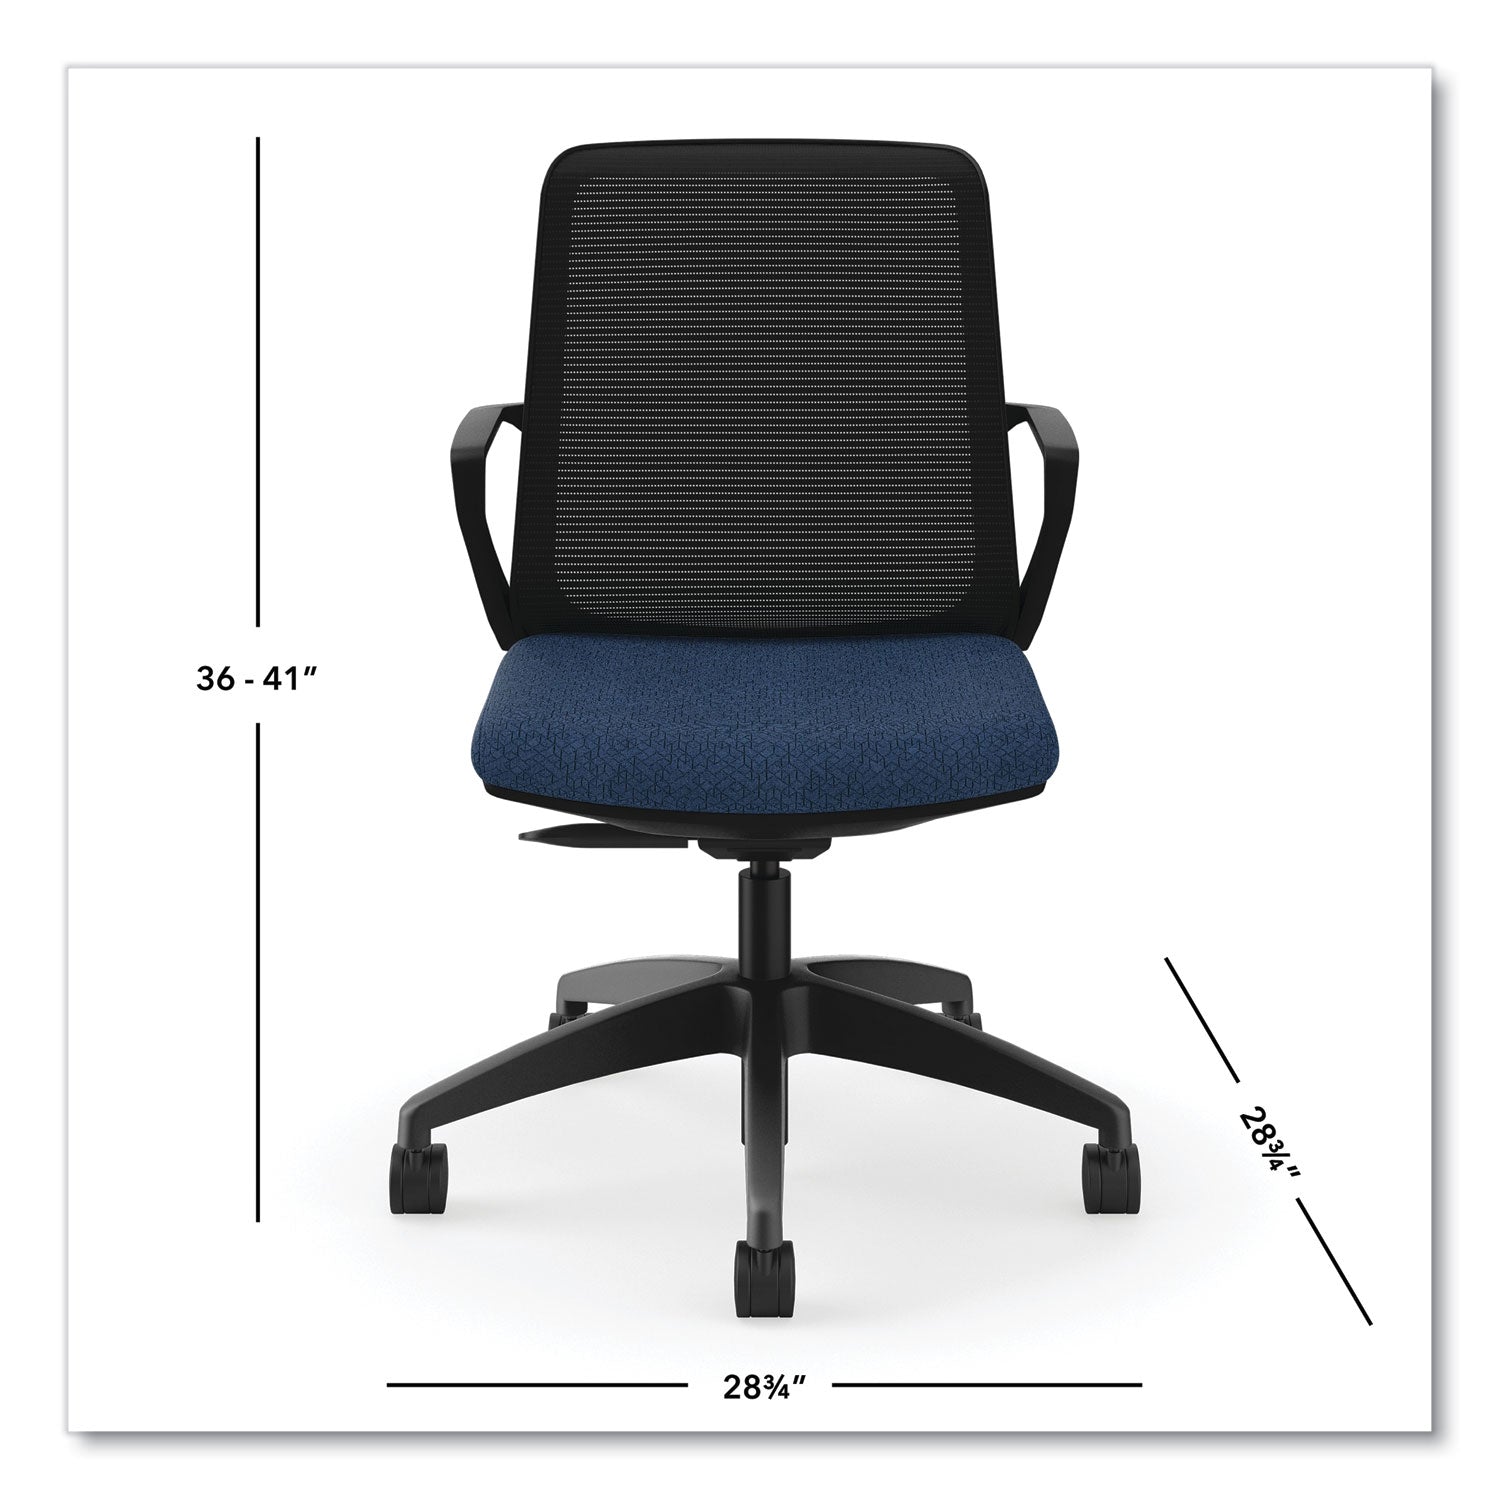 cliq-office-chair-supports-up-to-300-lb-17-to-22-seat-height-navy-seat-black-back-base-ships-in-7-10-business-days_honclqimapx13t - 4